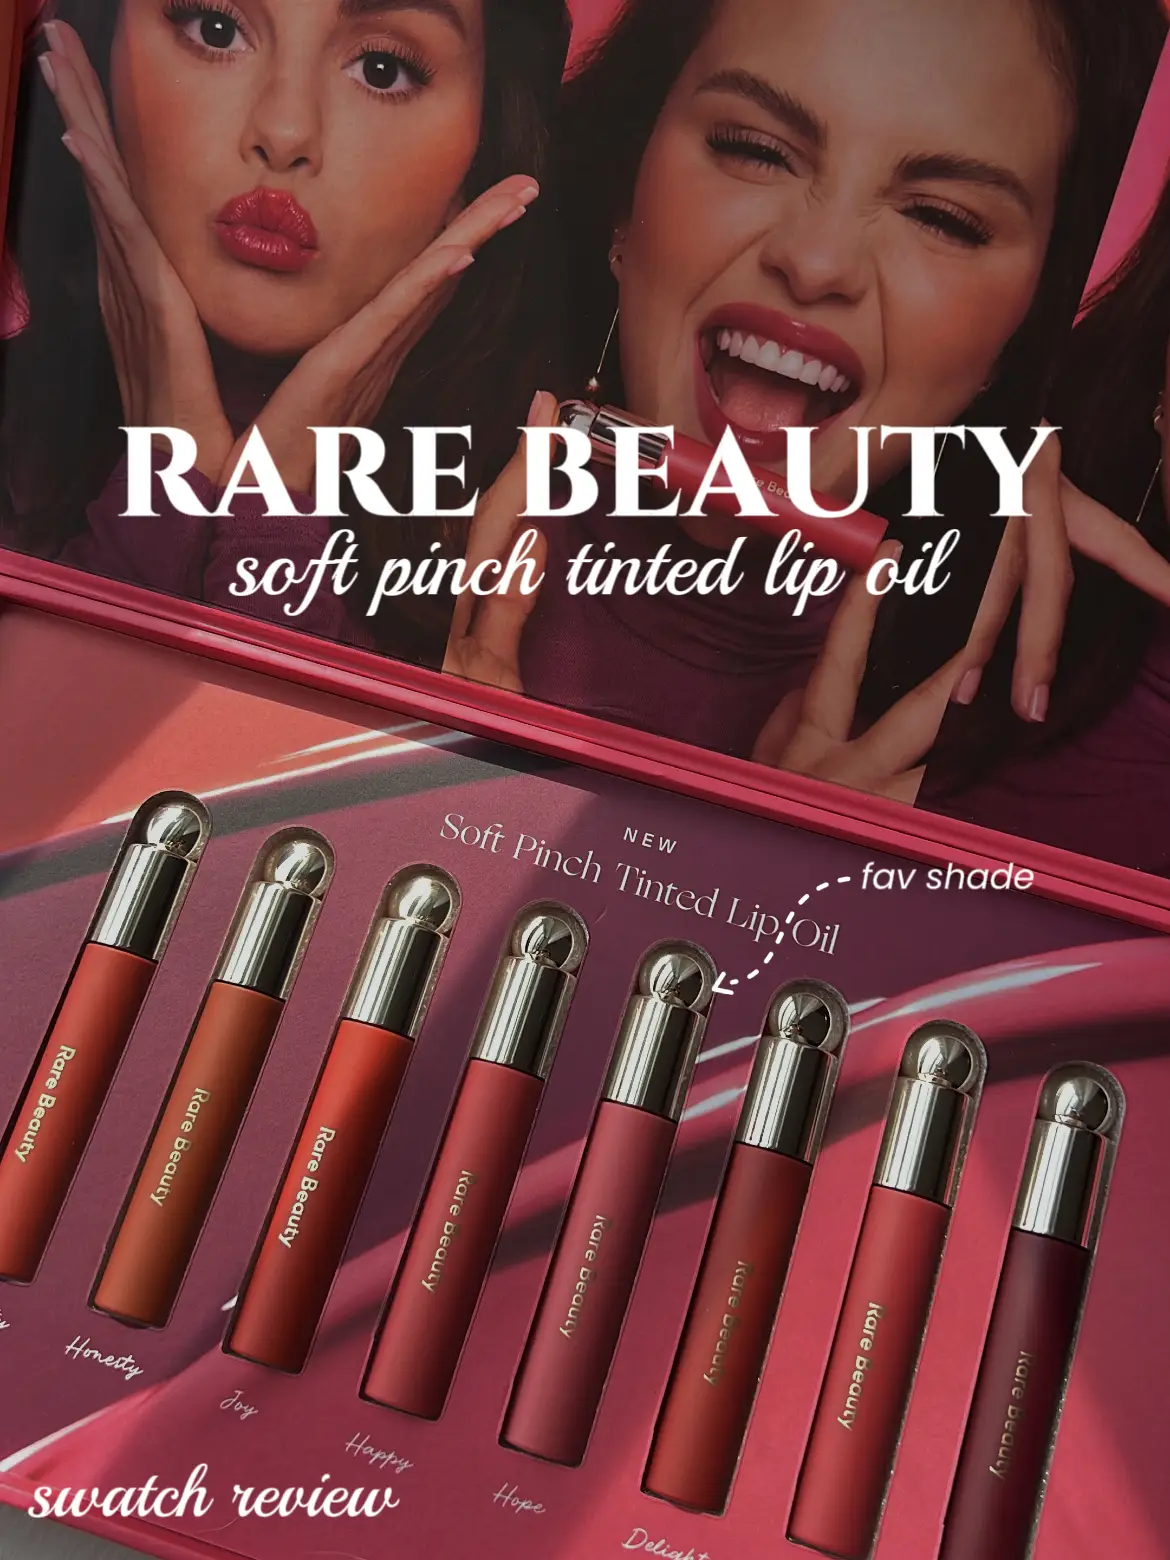 Rare Beauty Happy Soft Pinch Tinted Lip Oil Review & Swatches